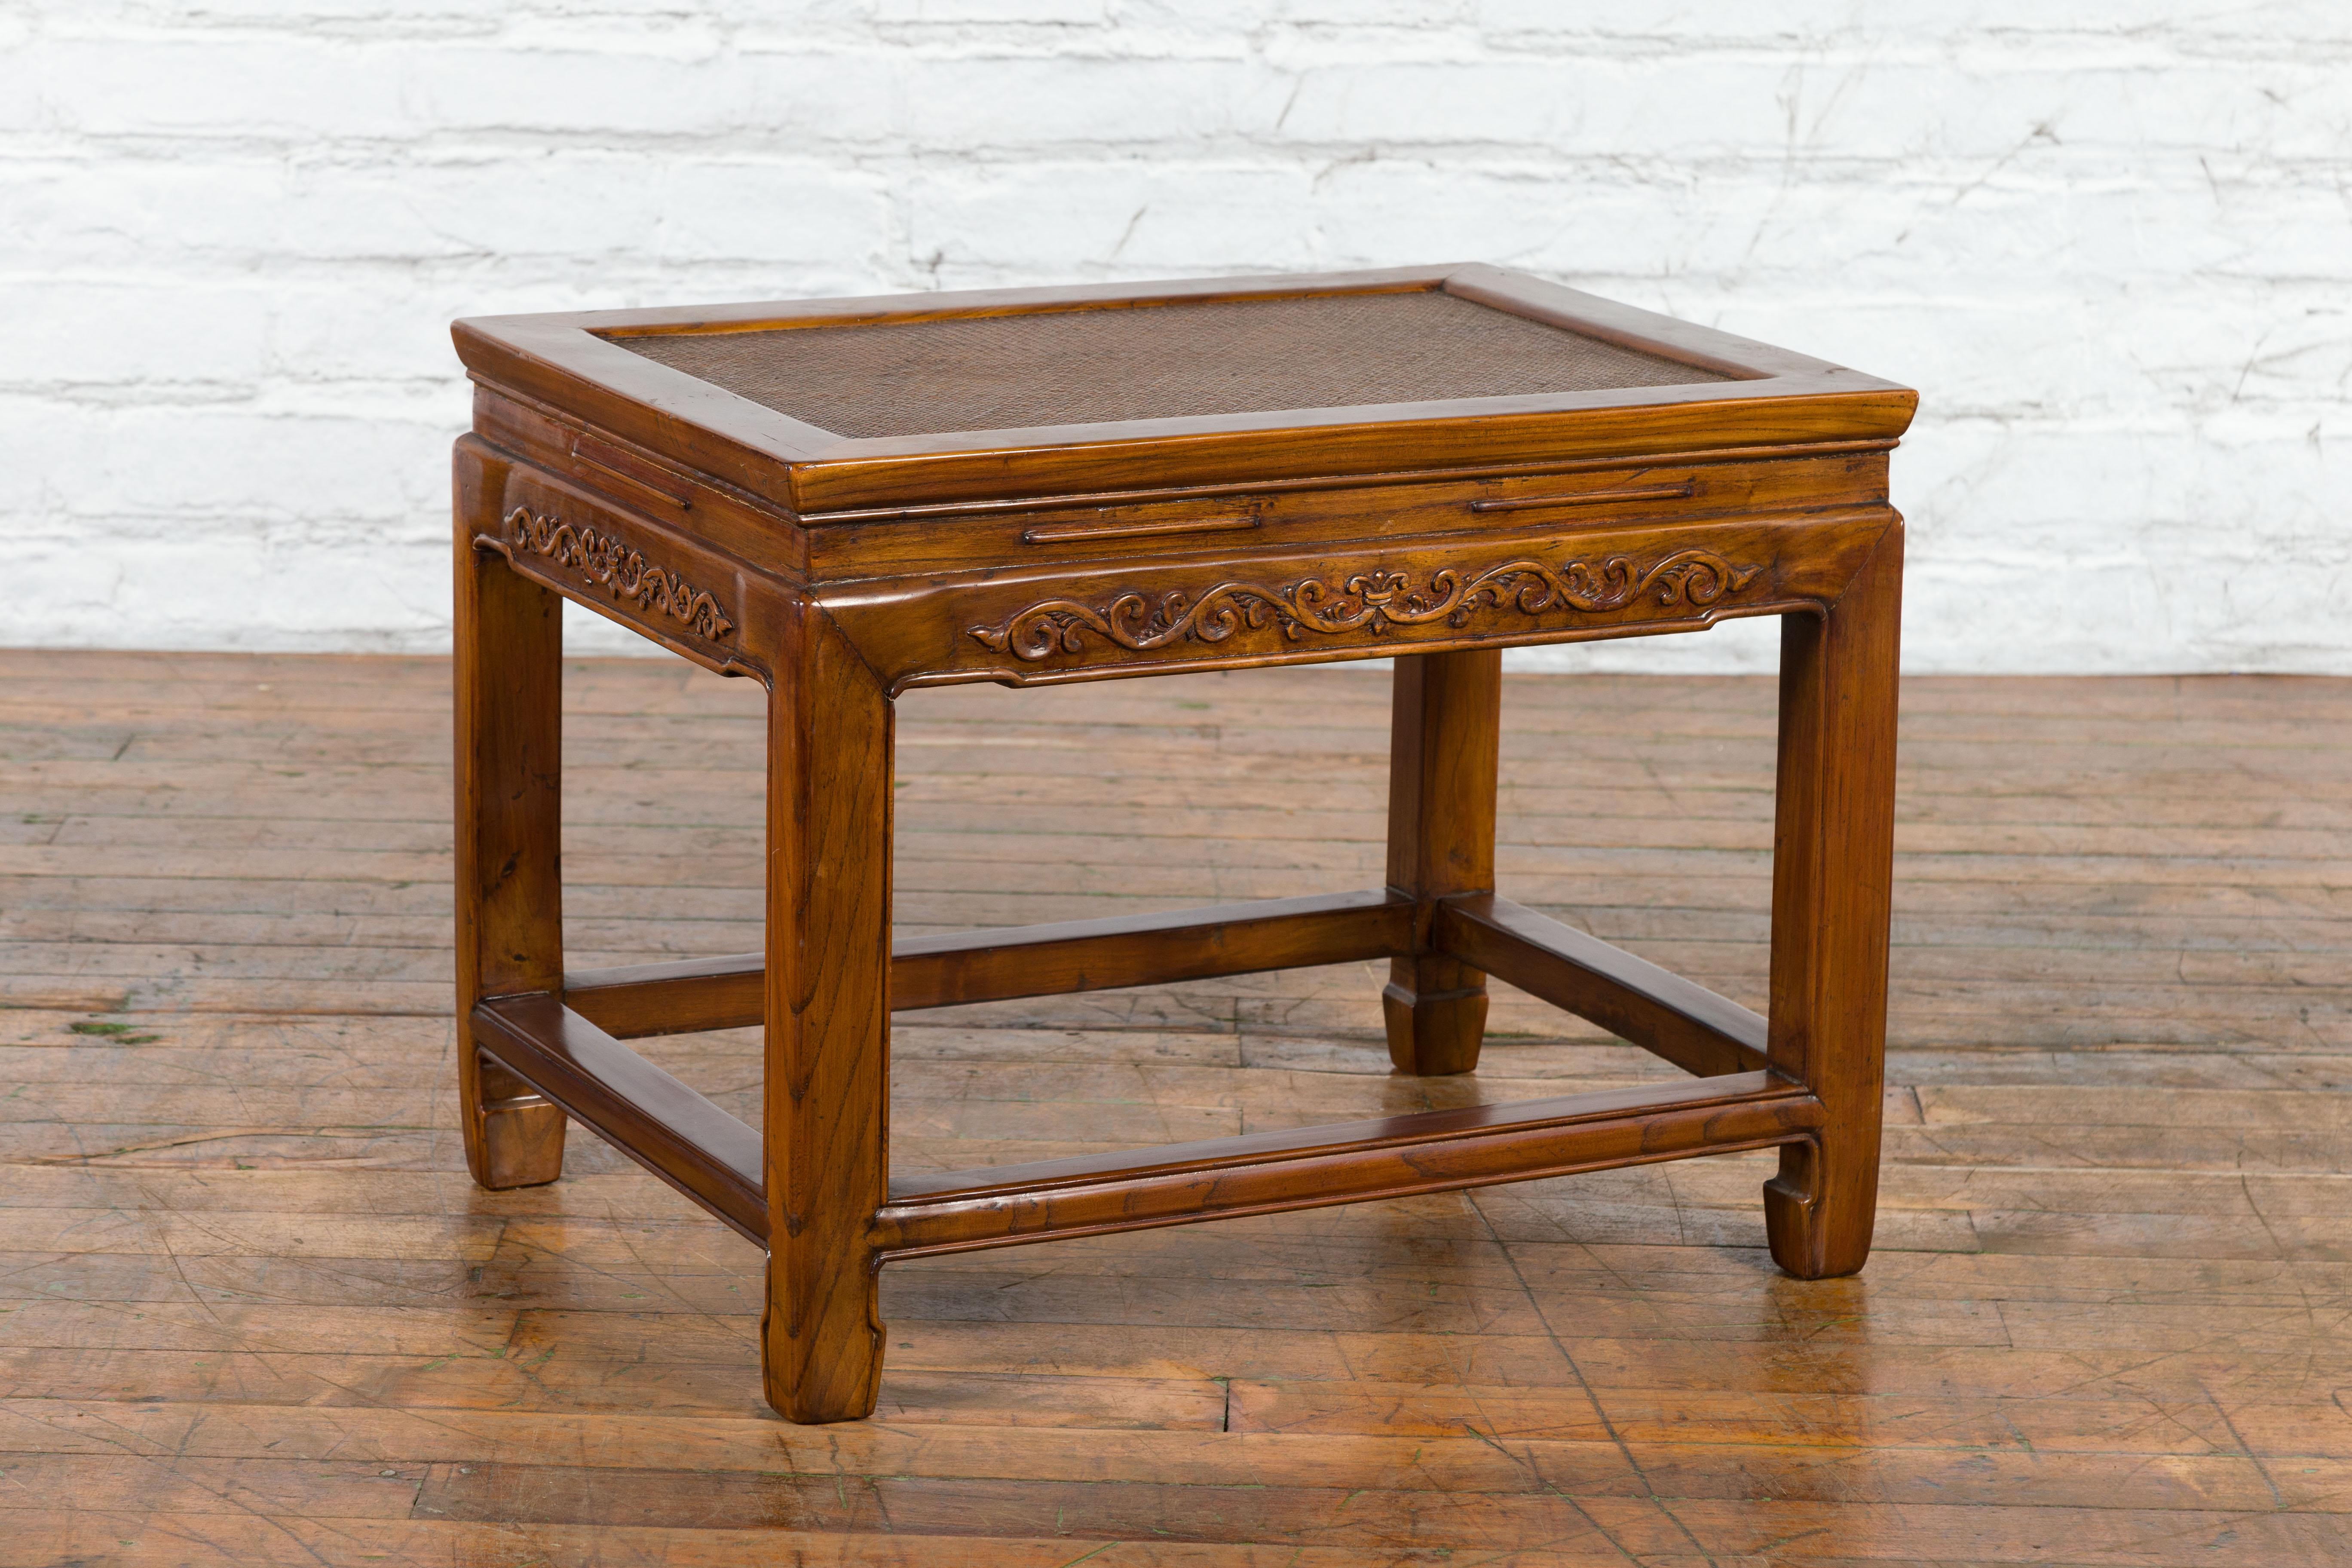 Rattan Chinese Late Qing Dynasty Elmwood Side Table with Low-Relief Carved Frieze For Sale